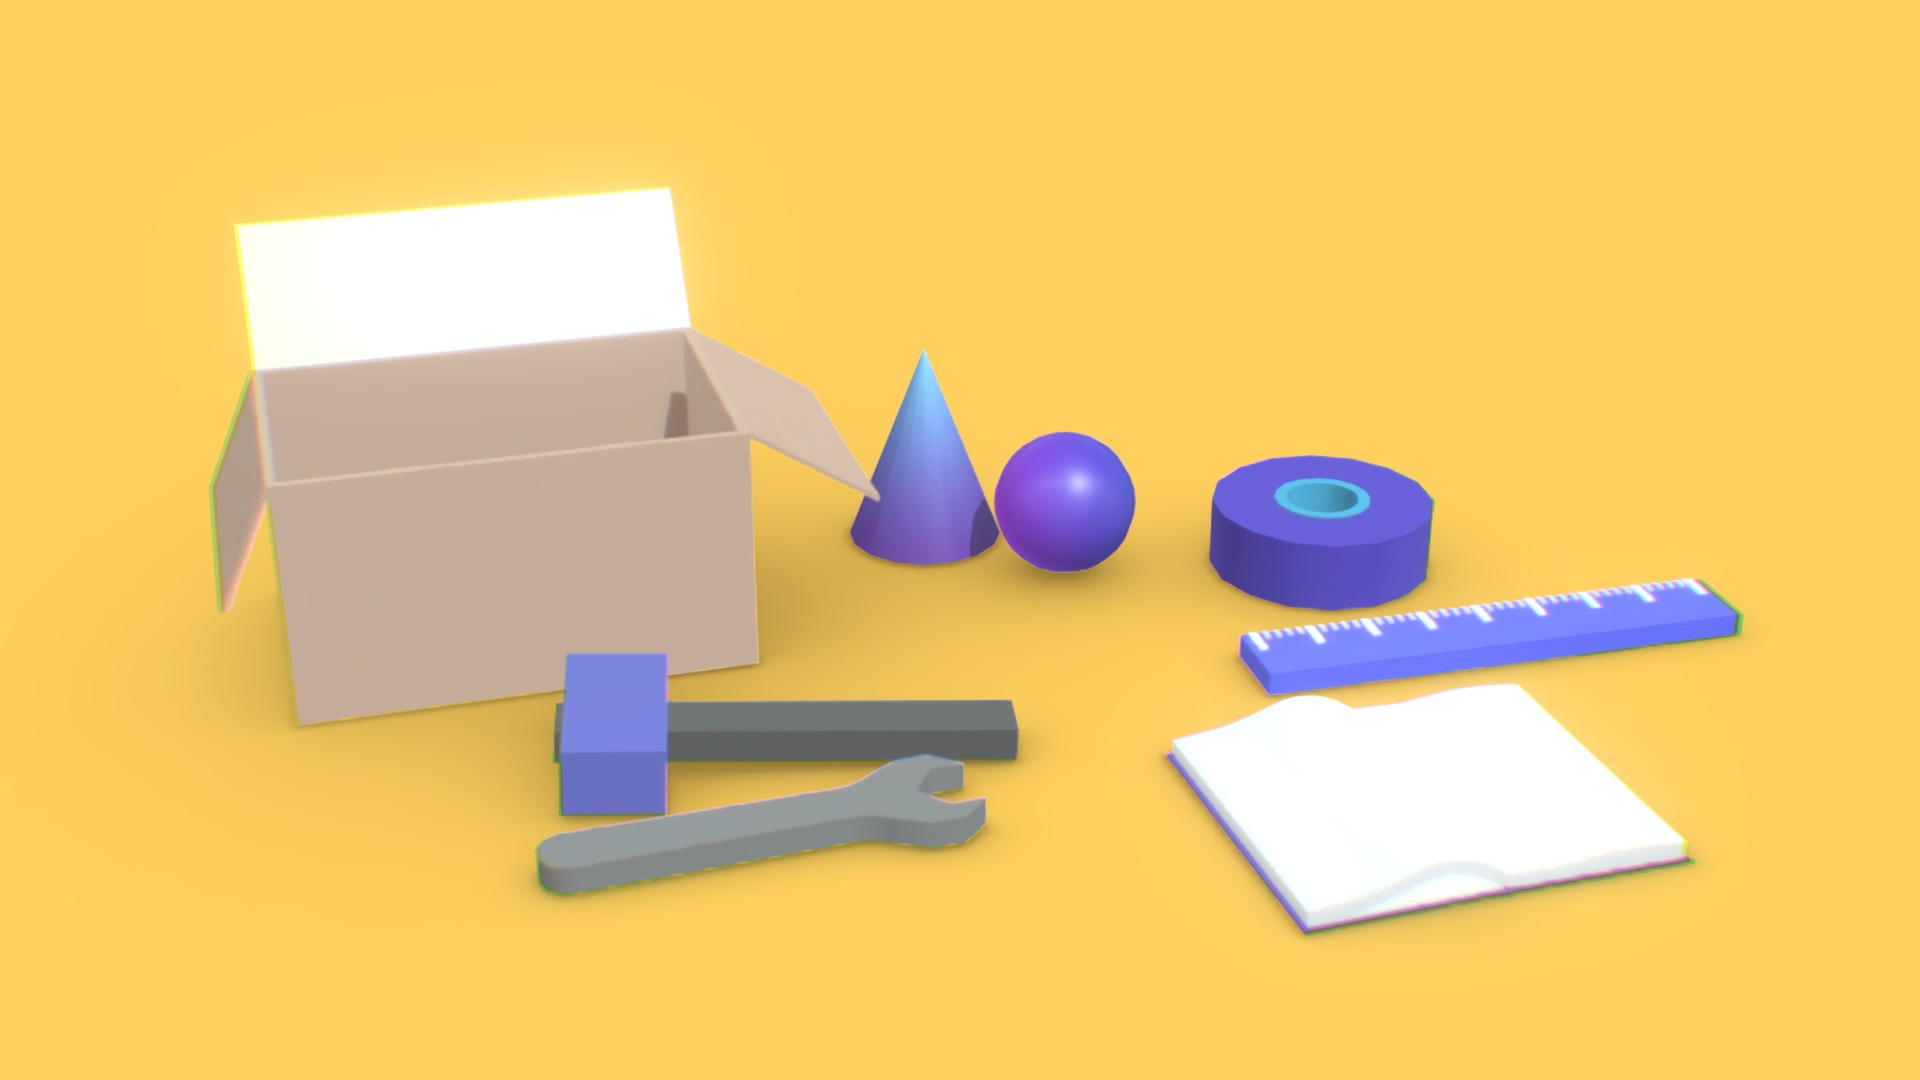 3D model Low Poly Tools Decor - This is a 3D model of the Low Poly Tools Decor. The 3D model is about a group of objects on a yellow background.